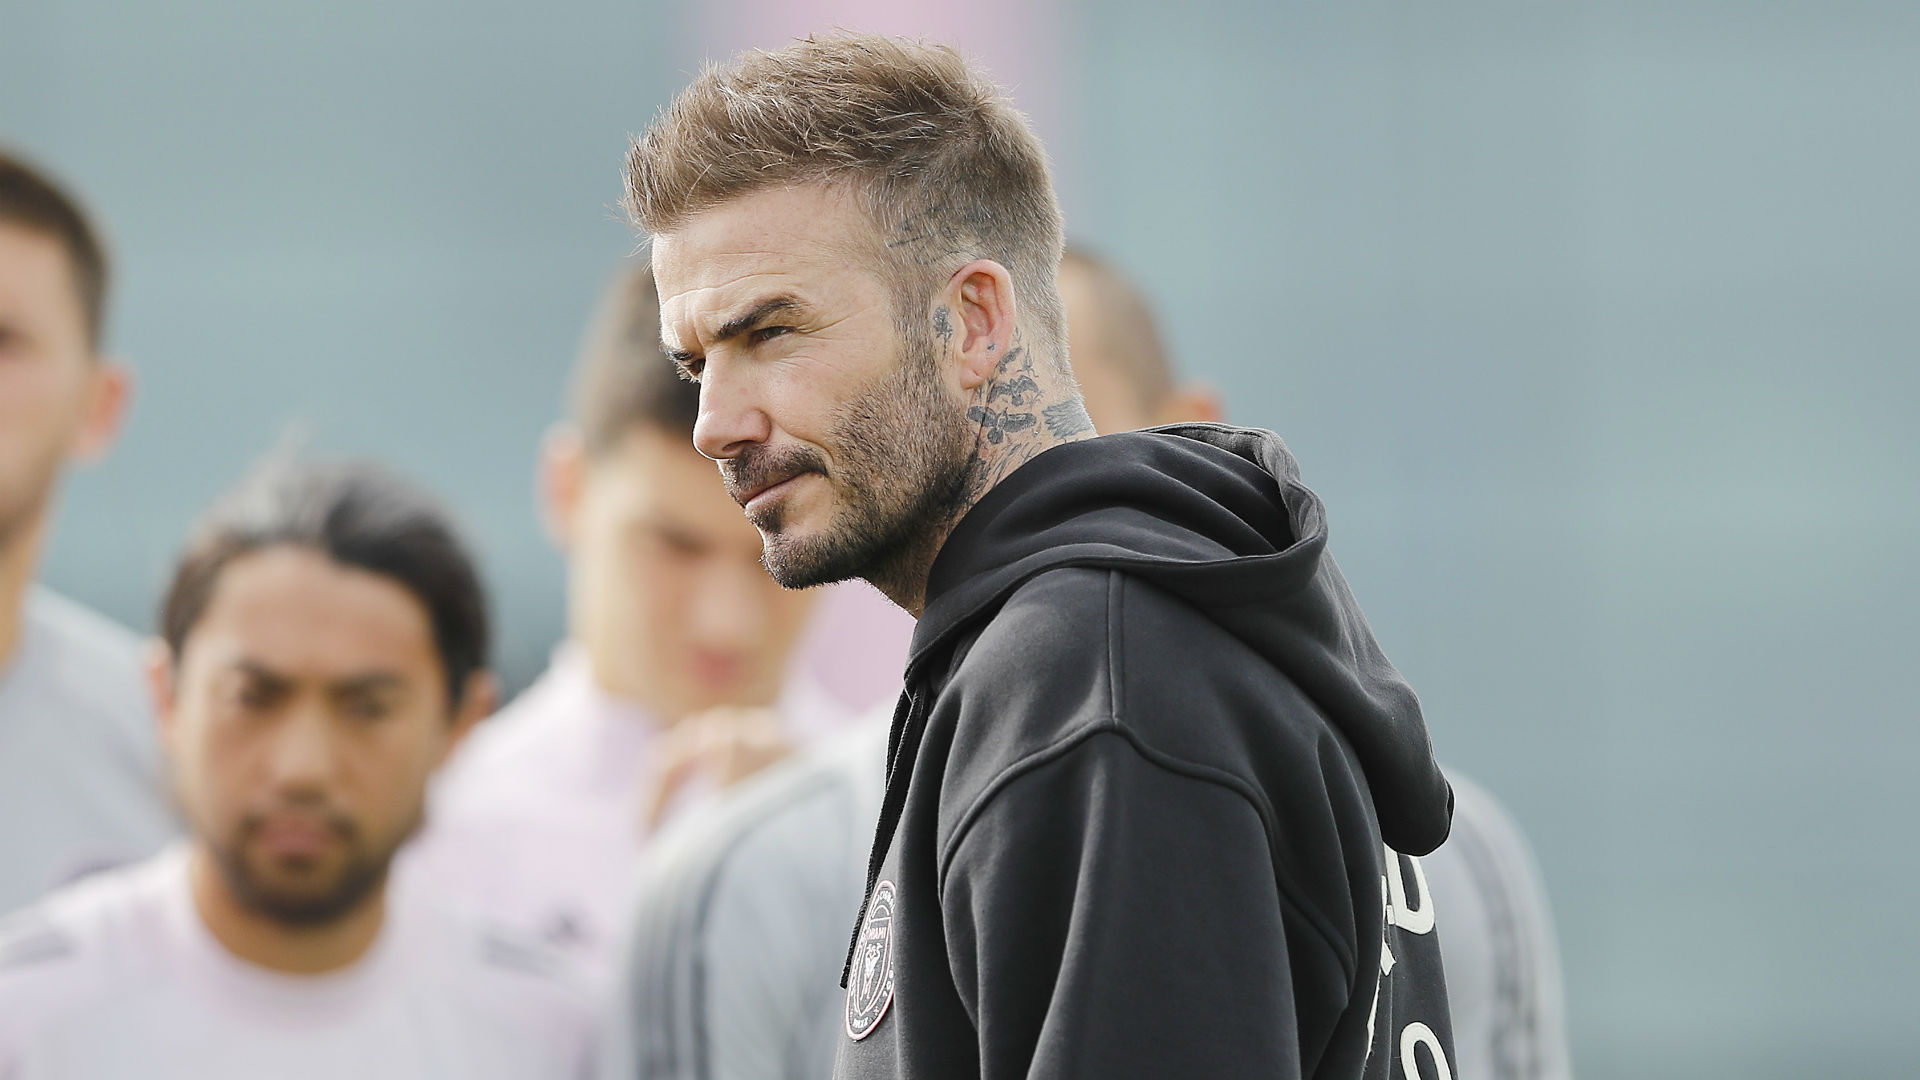 'It's the hardest thing I've done' - Beckham reveals Inter Miami